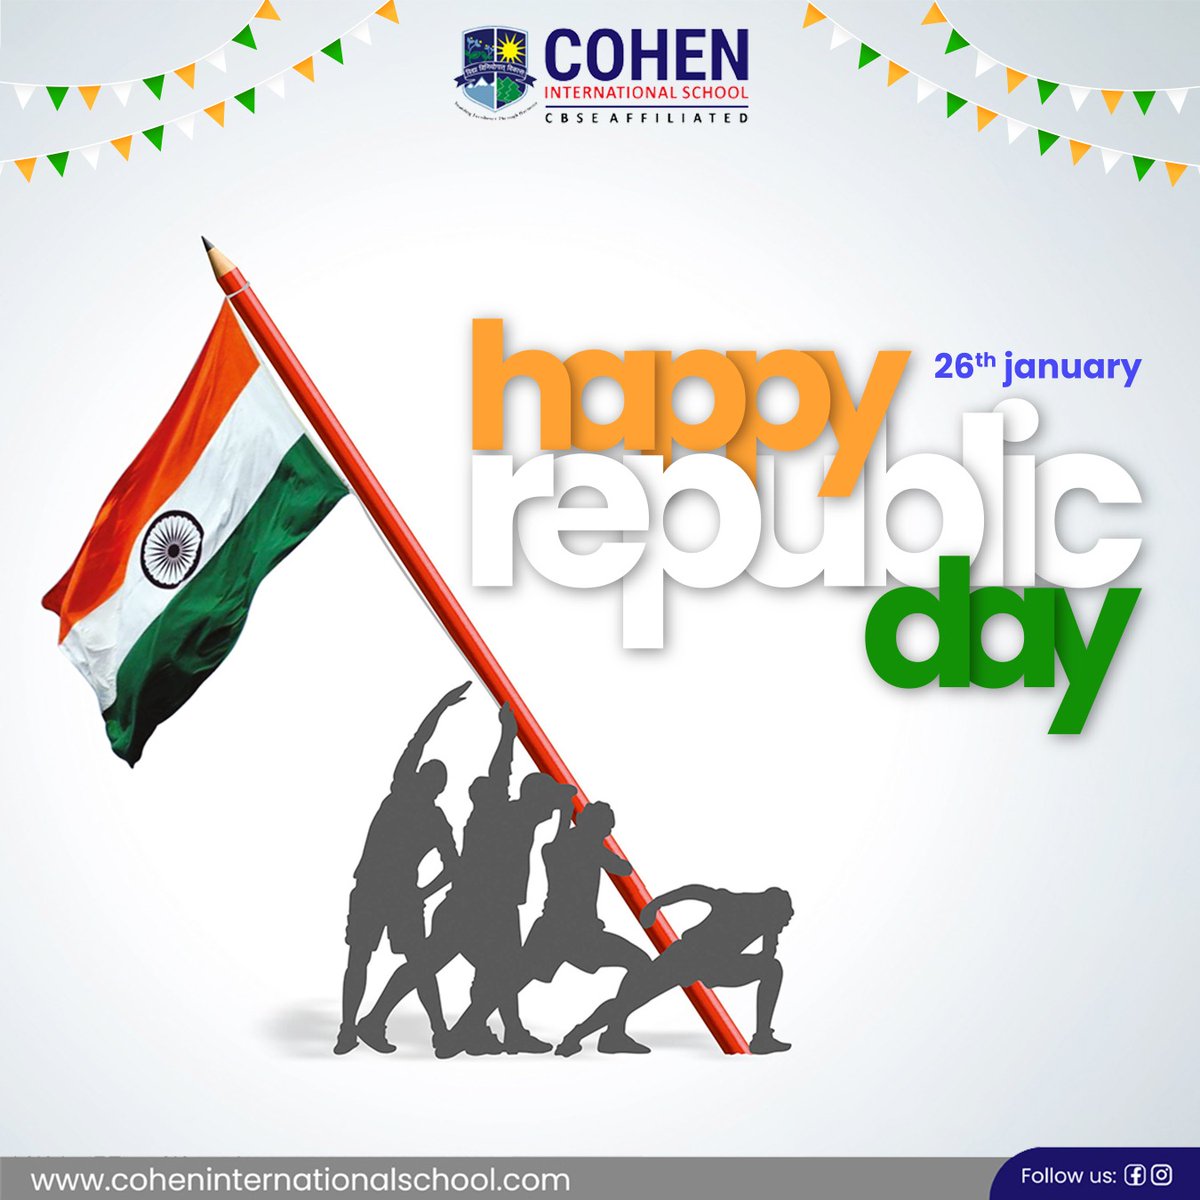 As we raise the flag high, let's pledge to contribute towards a progressive and harmonious India. Happy Republic Day! 🚀 

#RepublicDay2024 #IndianPride #ProgressiveIndia #RepublicDayPledge #CohenInternationalSchool #Bhubaneswar